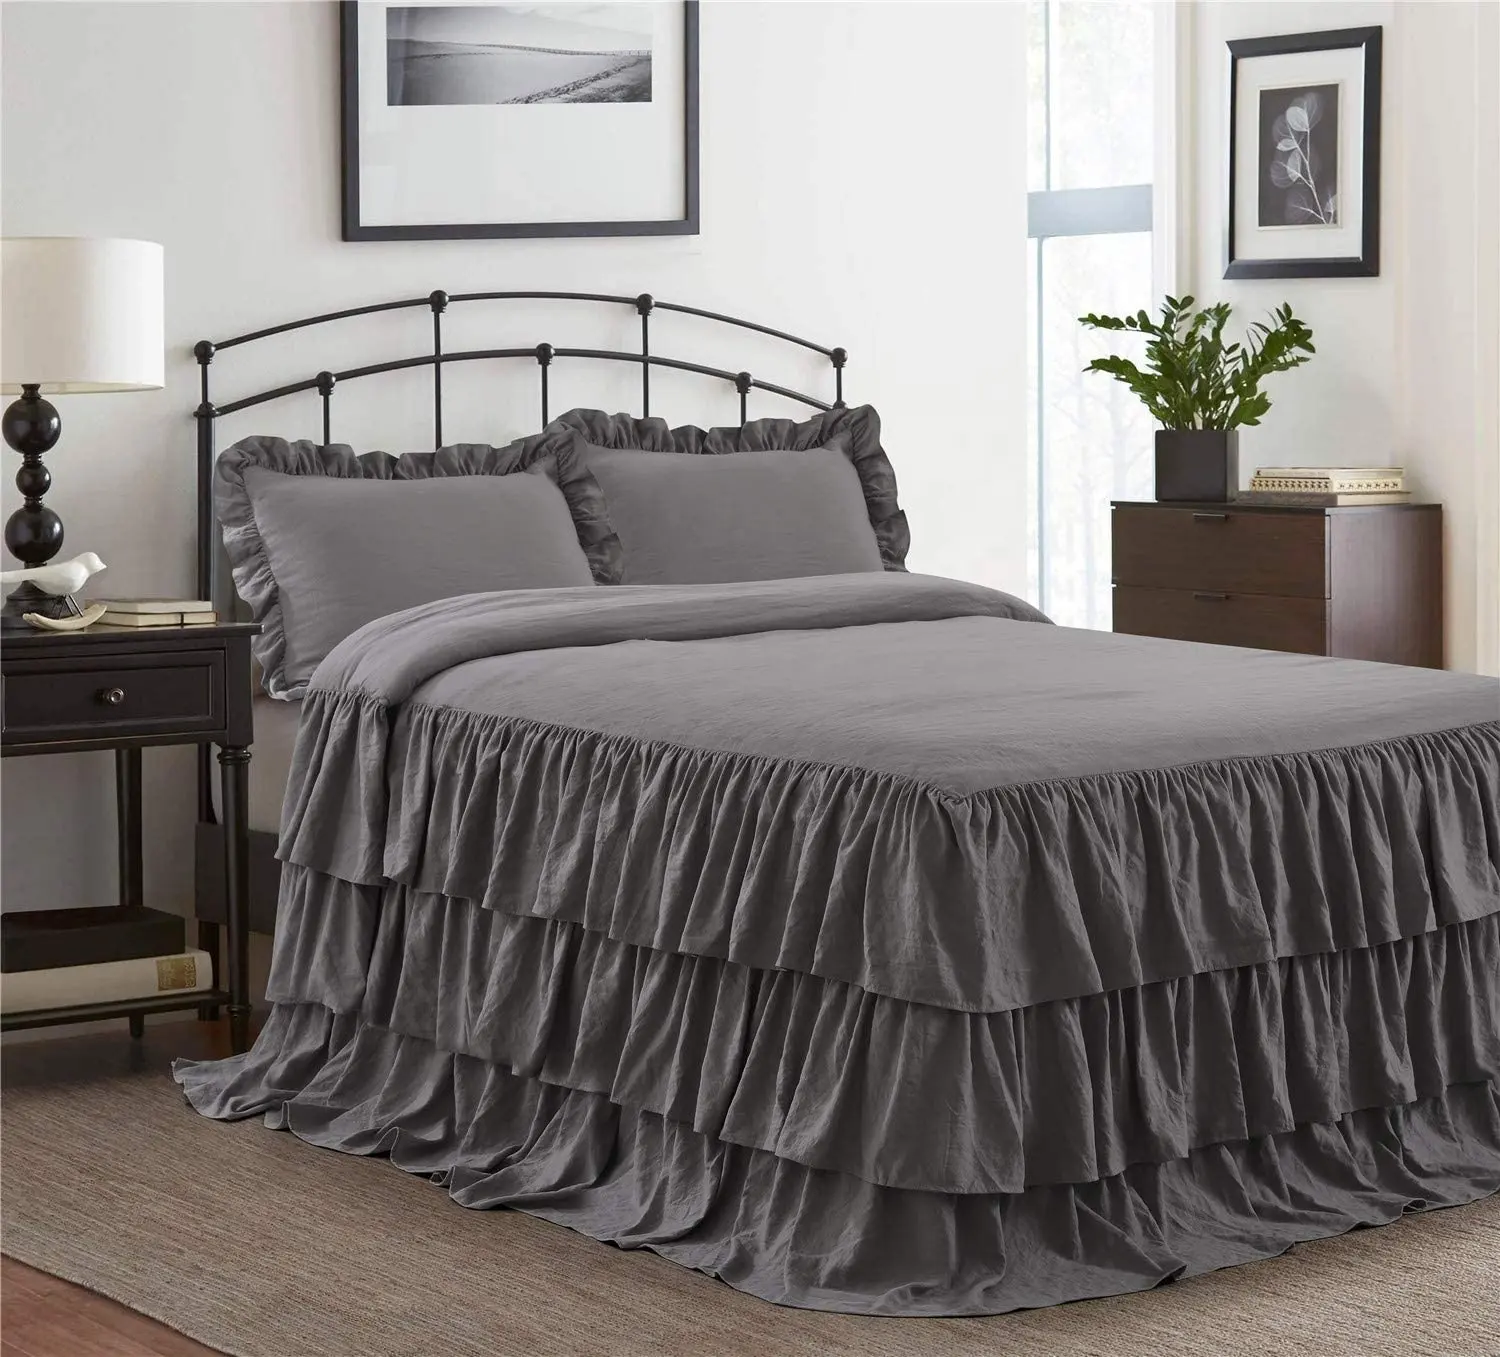 3 Piece Ruffle Skirt Bedspread Set King-Gray Color 30 Inches Drop Ruffled Style Bed Skirt Coverlets Bedspreads Dust Ruffles